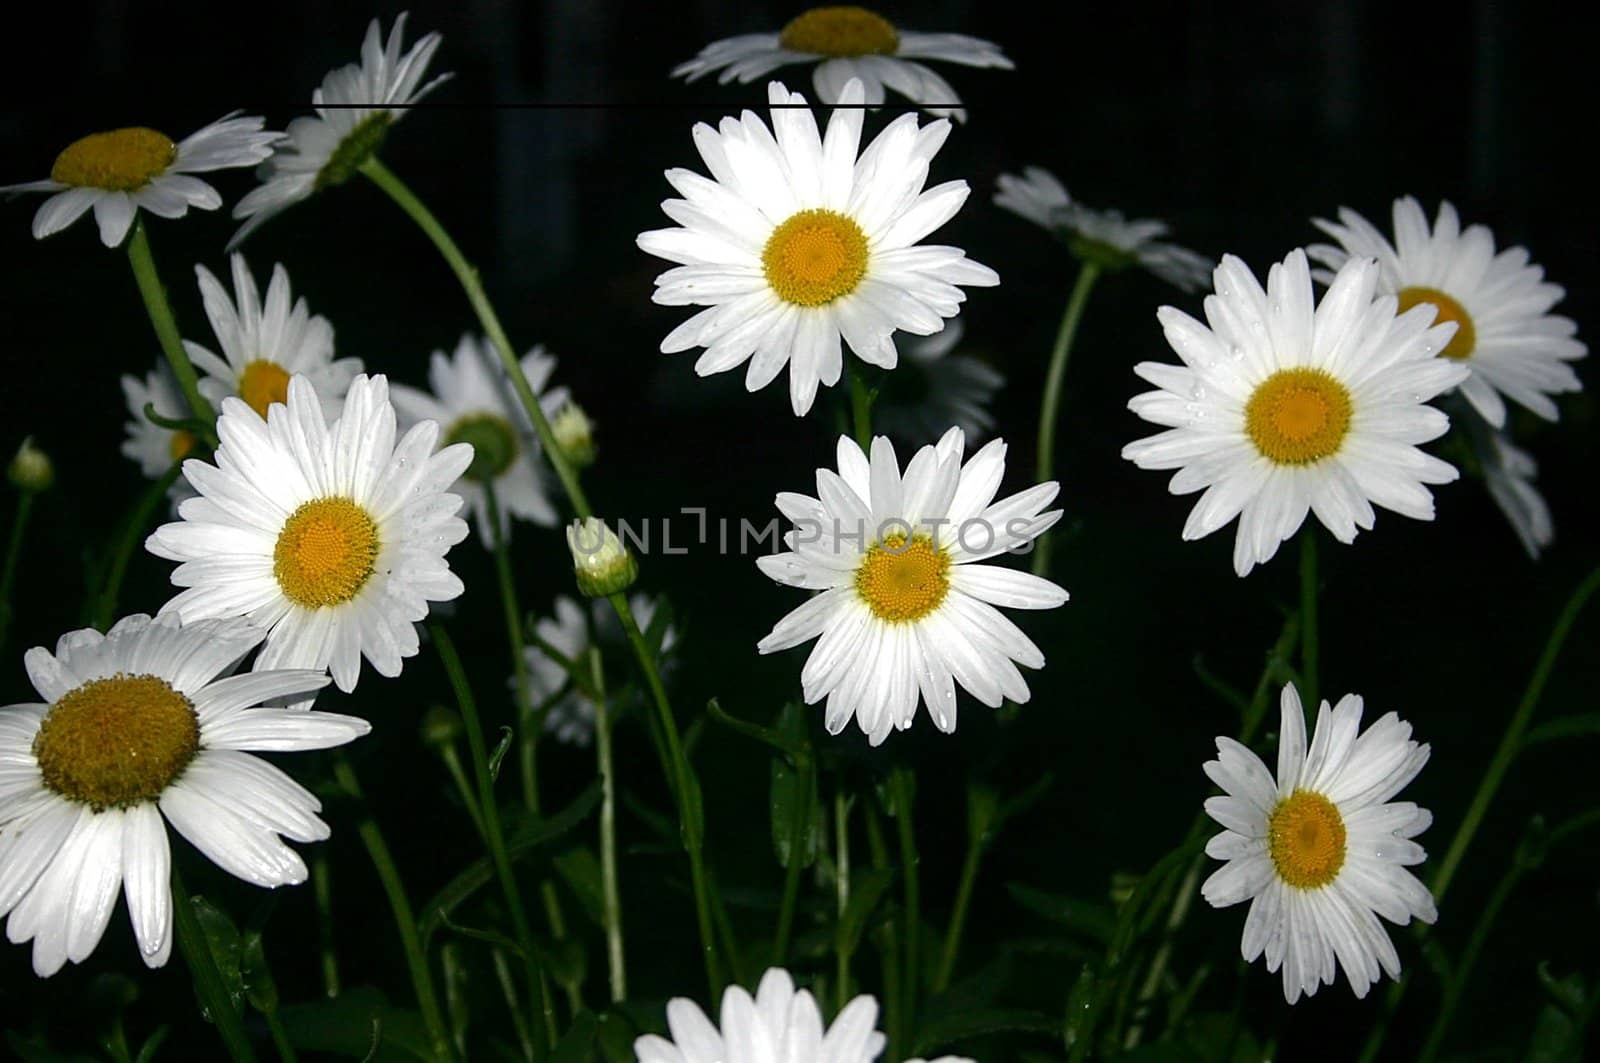 Wild daisies in garden before the sun rises